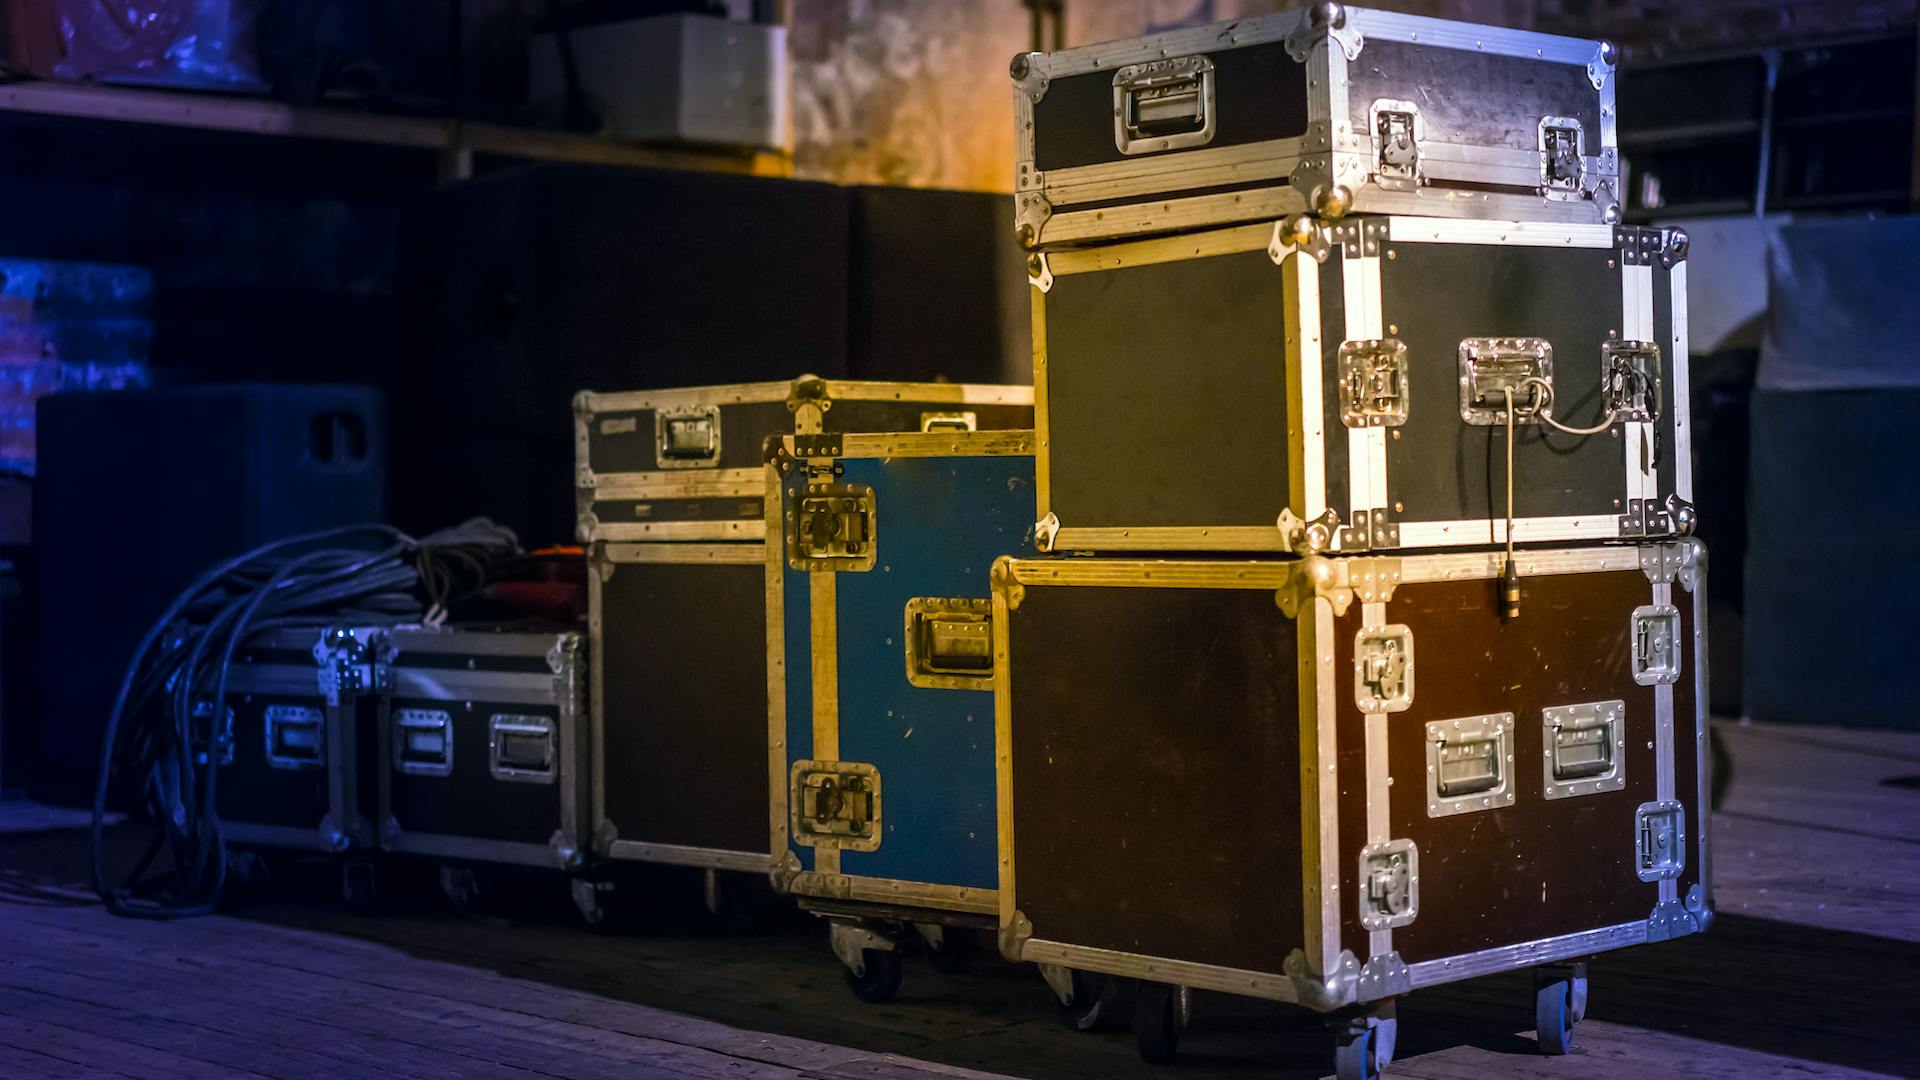 Don’t risk losing or damaging the musical instruments and equipment that are vital for the orchestra’s performance, as often happens with commercial airlines.